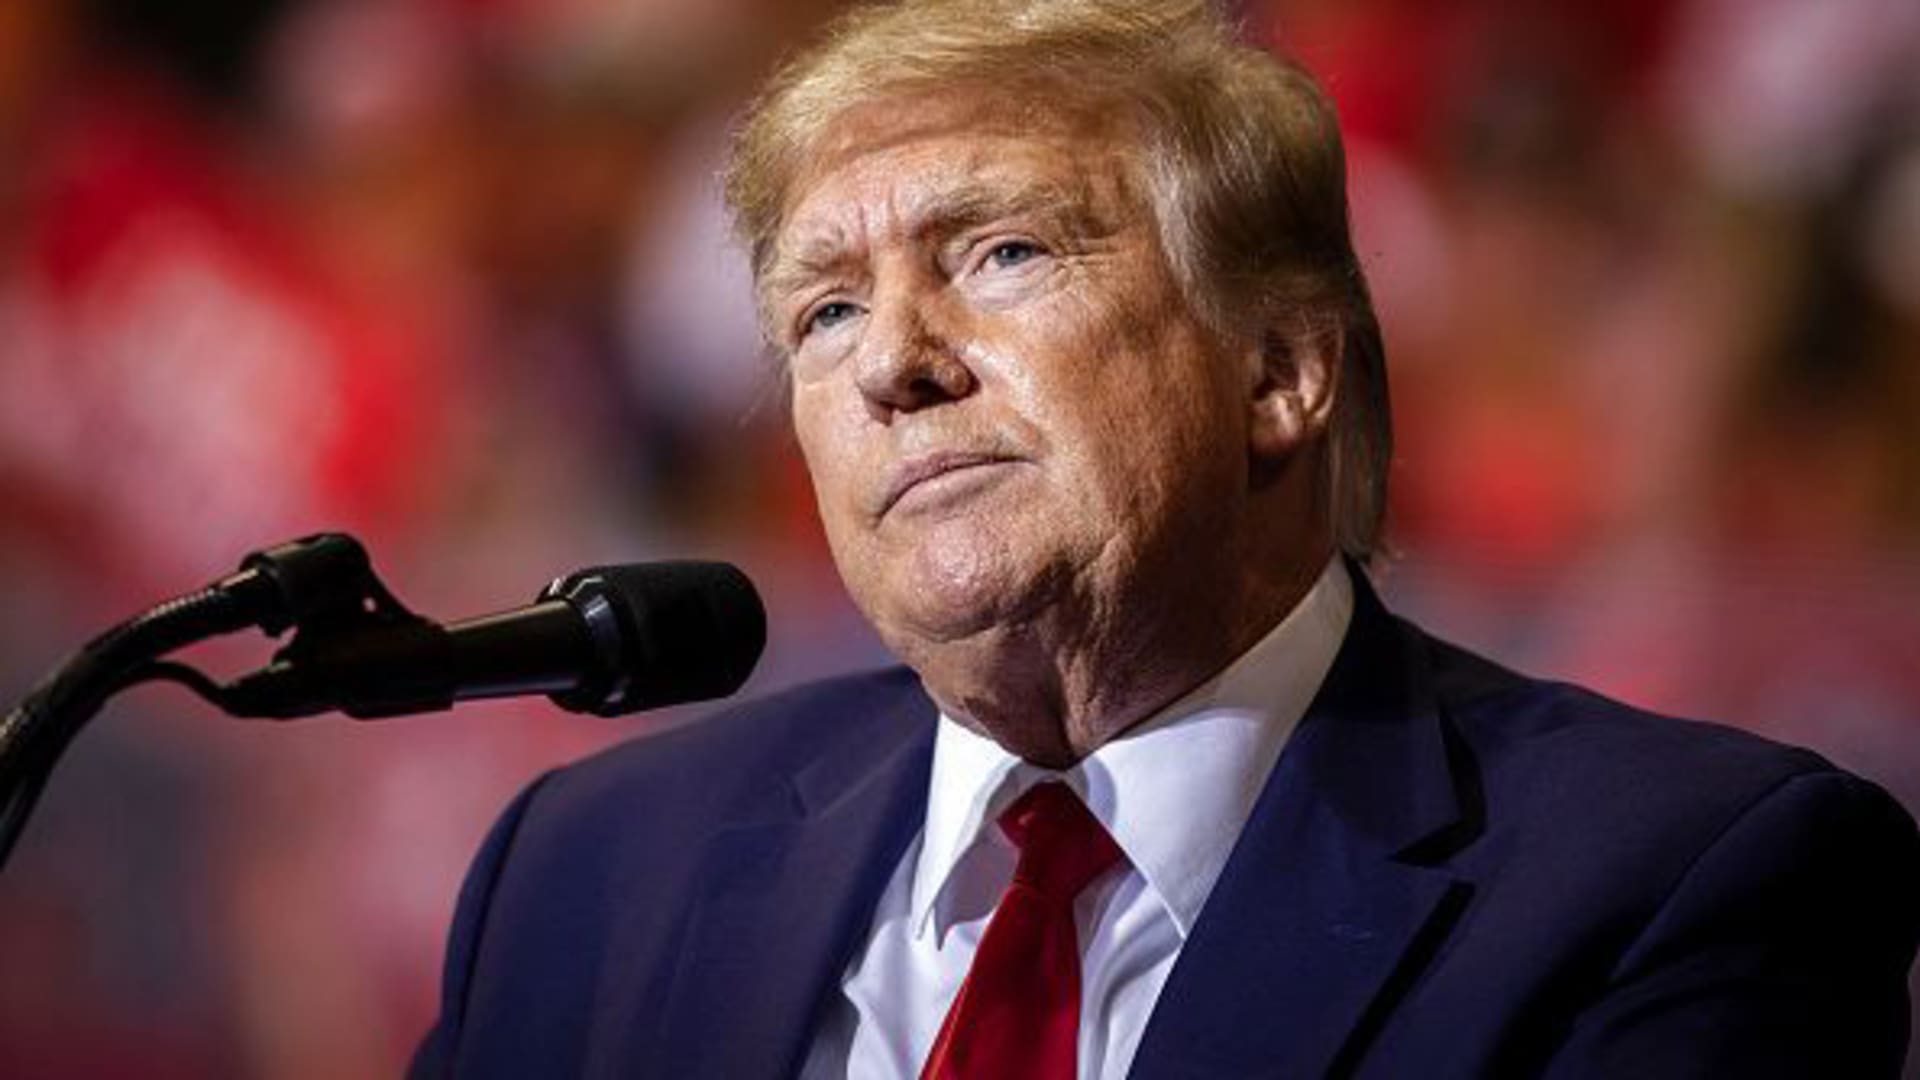 Former President Donald Trump speaks on May 28, 2022 in Casper, Wyoming. The rally is being held to support Harriet Hageman, Rep. Liz Cheneys primary challenger in Wyoming.